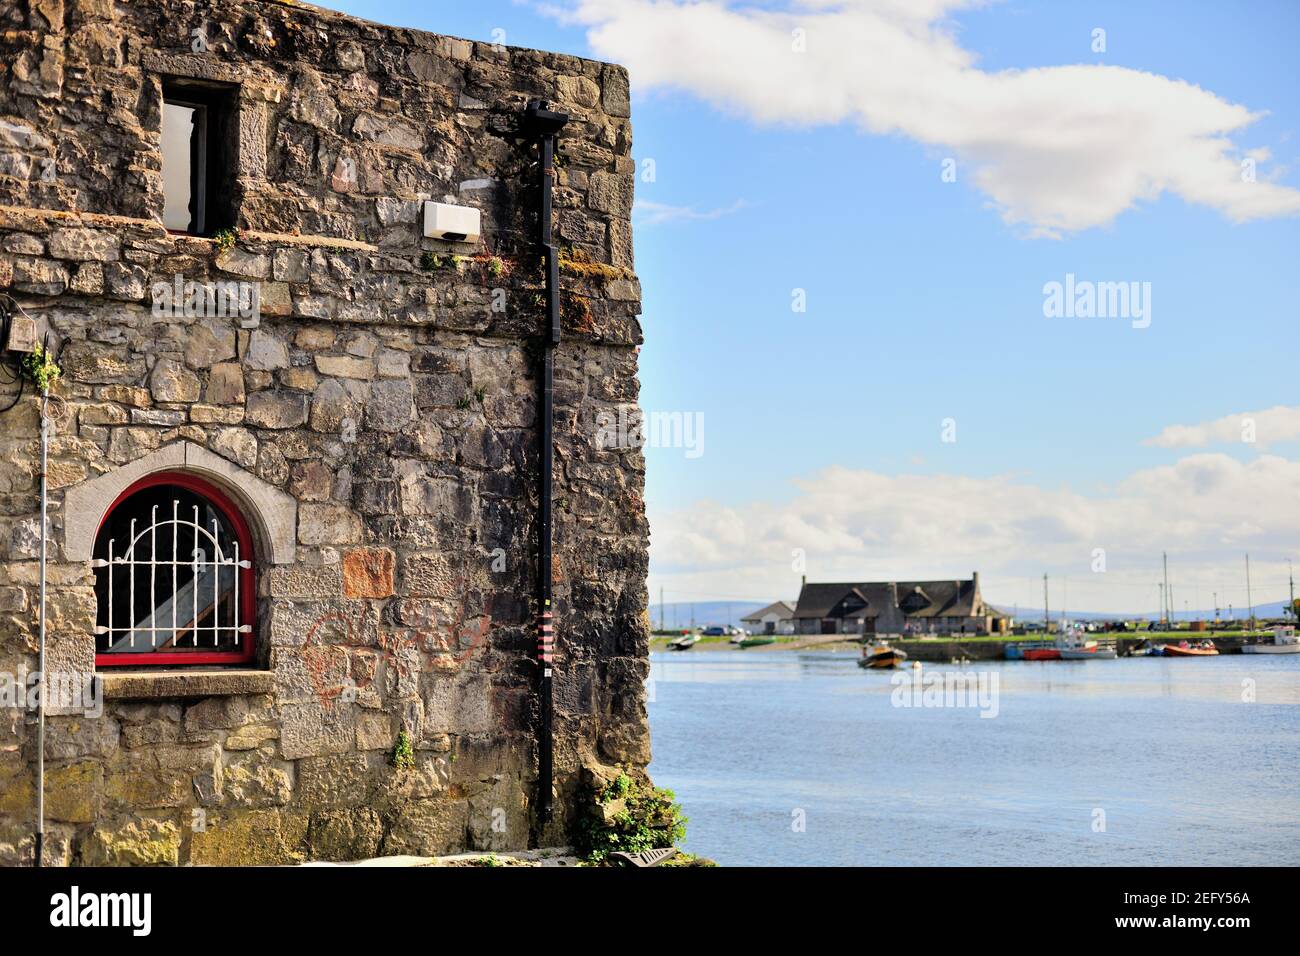 Galway, County Galway, Ireland. A segment of the Spanish Gate extending to Galway Bay. The gate was built in 1584. Stock Photo